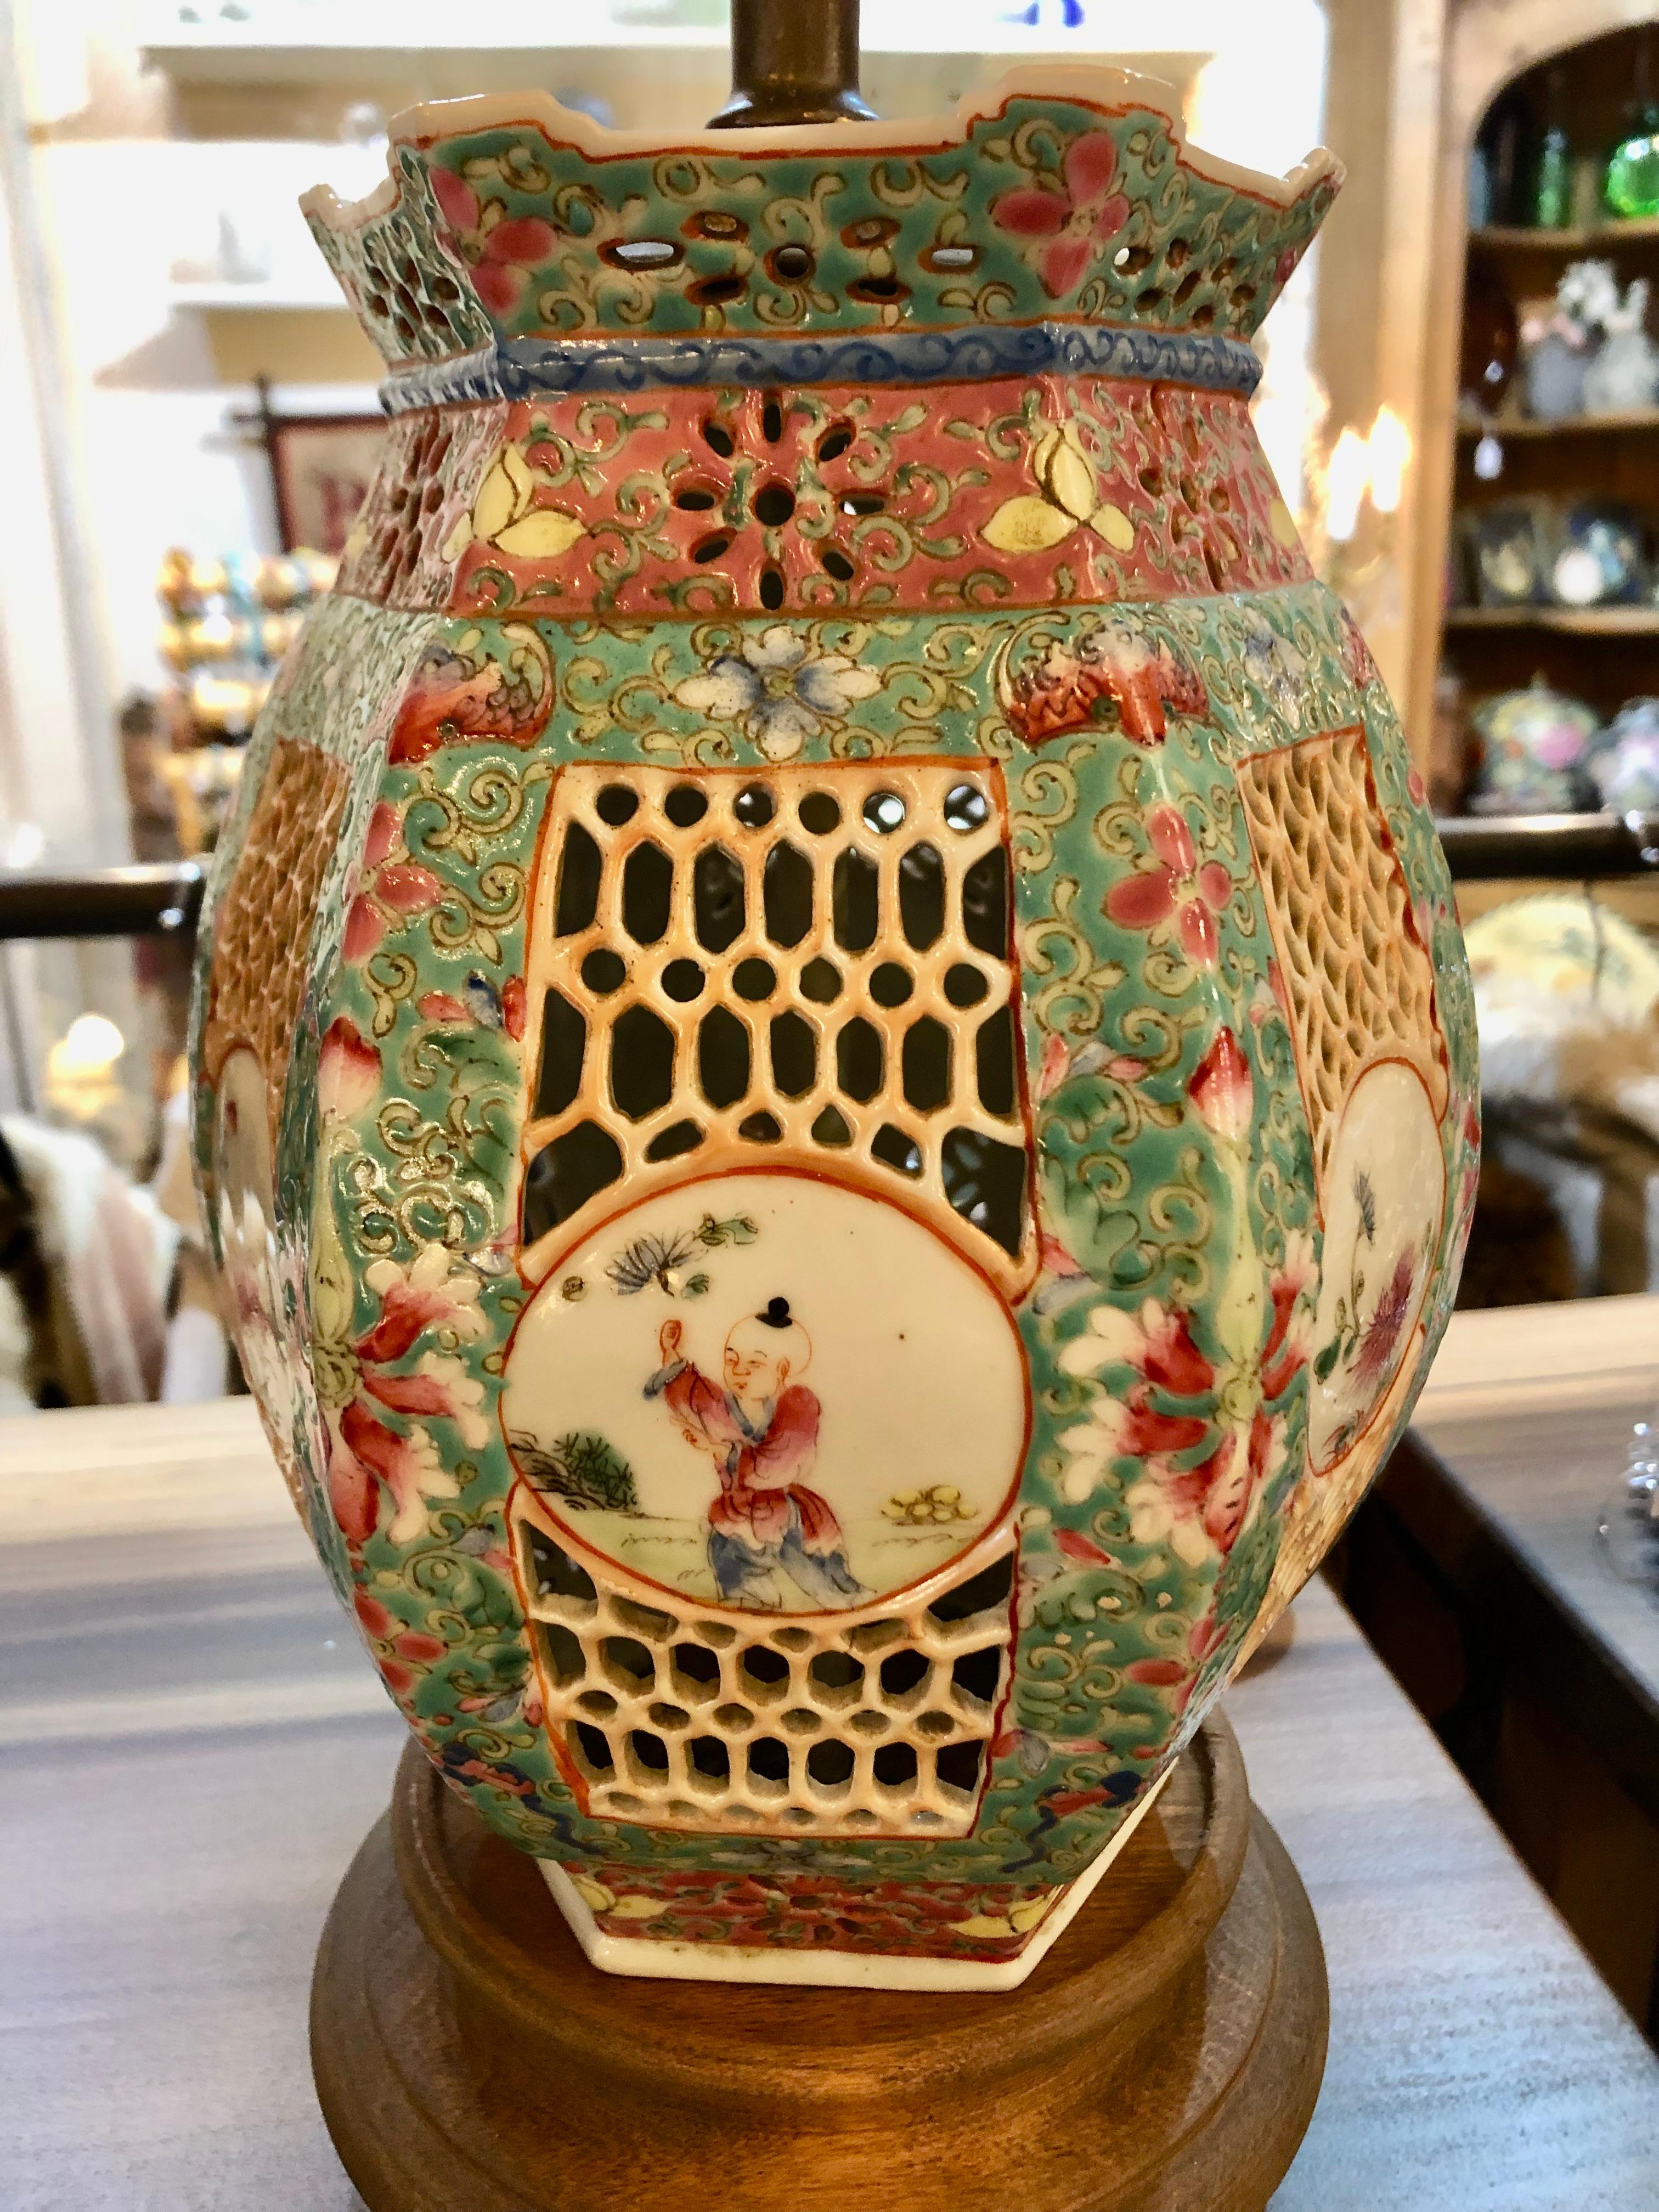 Lovely pair of Chinese porcelain table lamps having a beautiful round but angled shape and gorgeous color palette of celadon, pink, gold and cream. Detailed round paintings of figures and flowers as well as lattice cut out design are splendid.